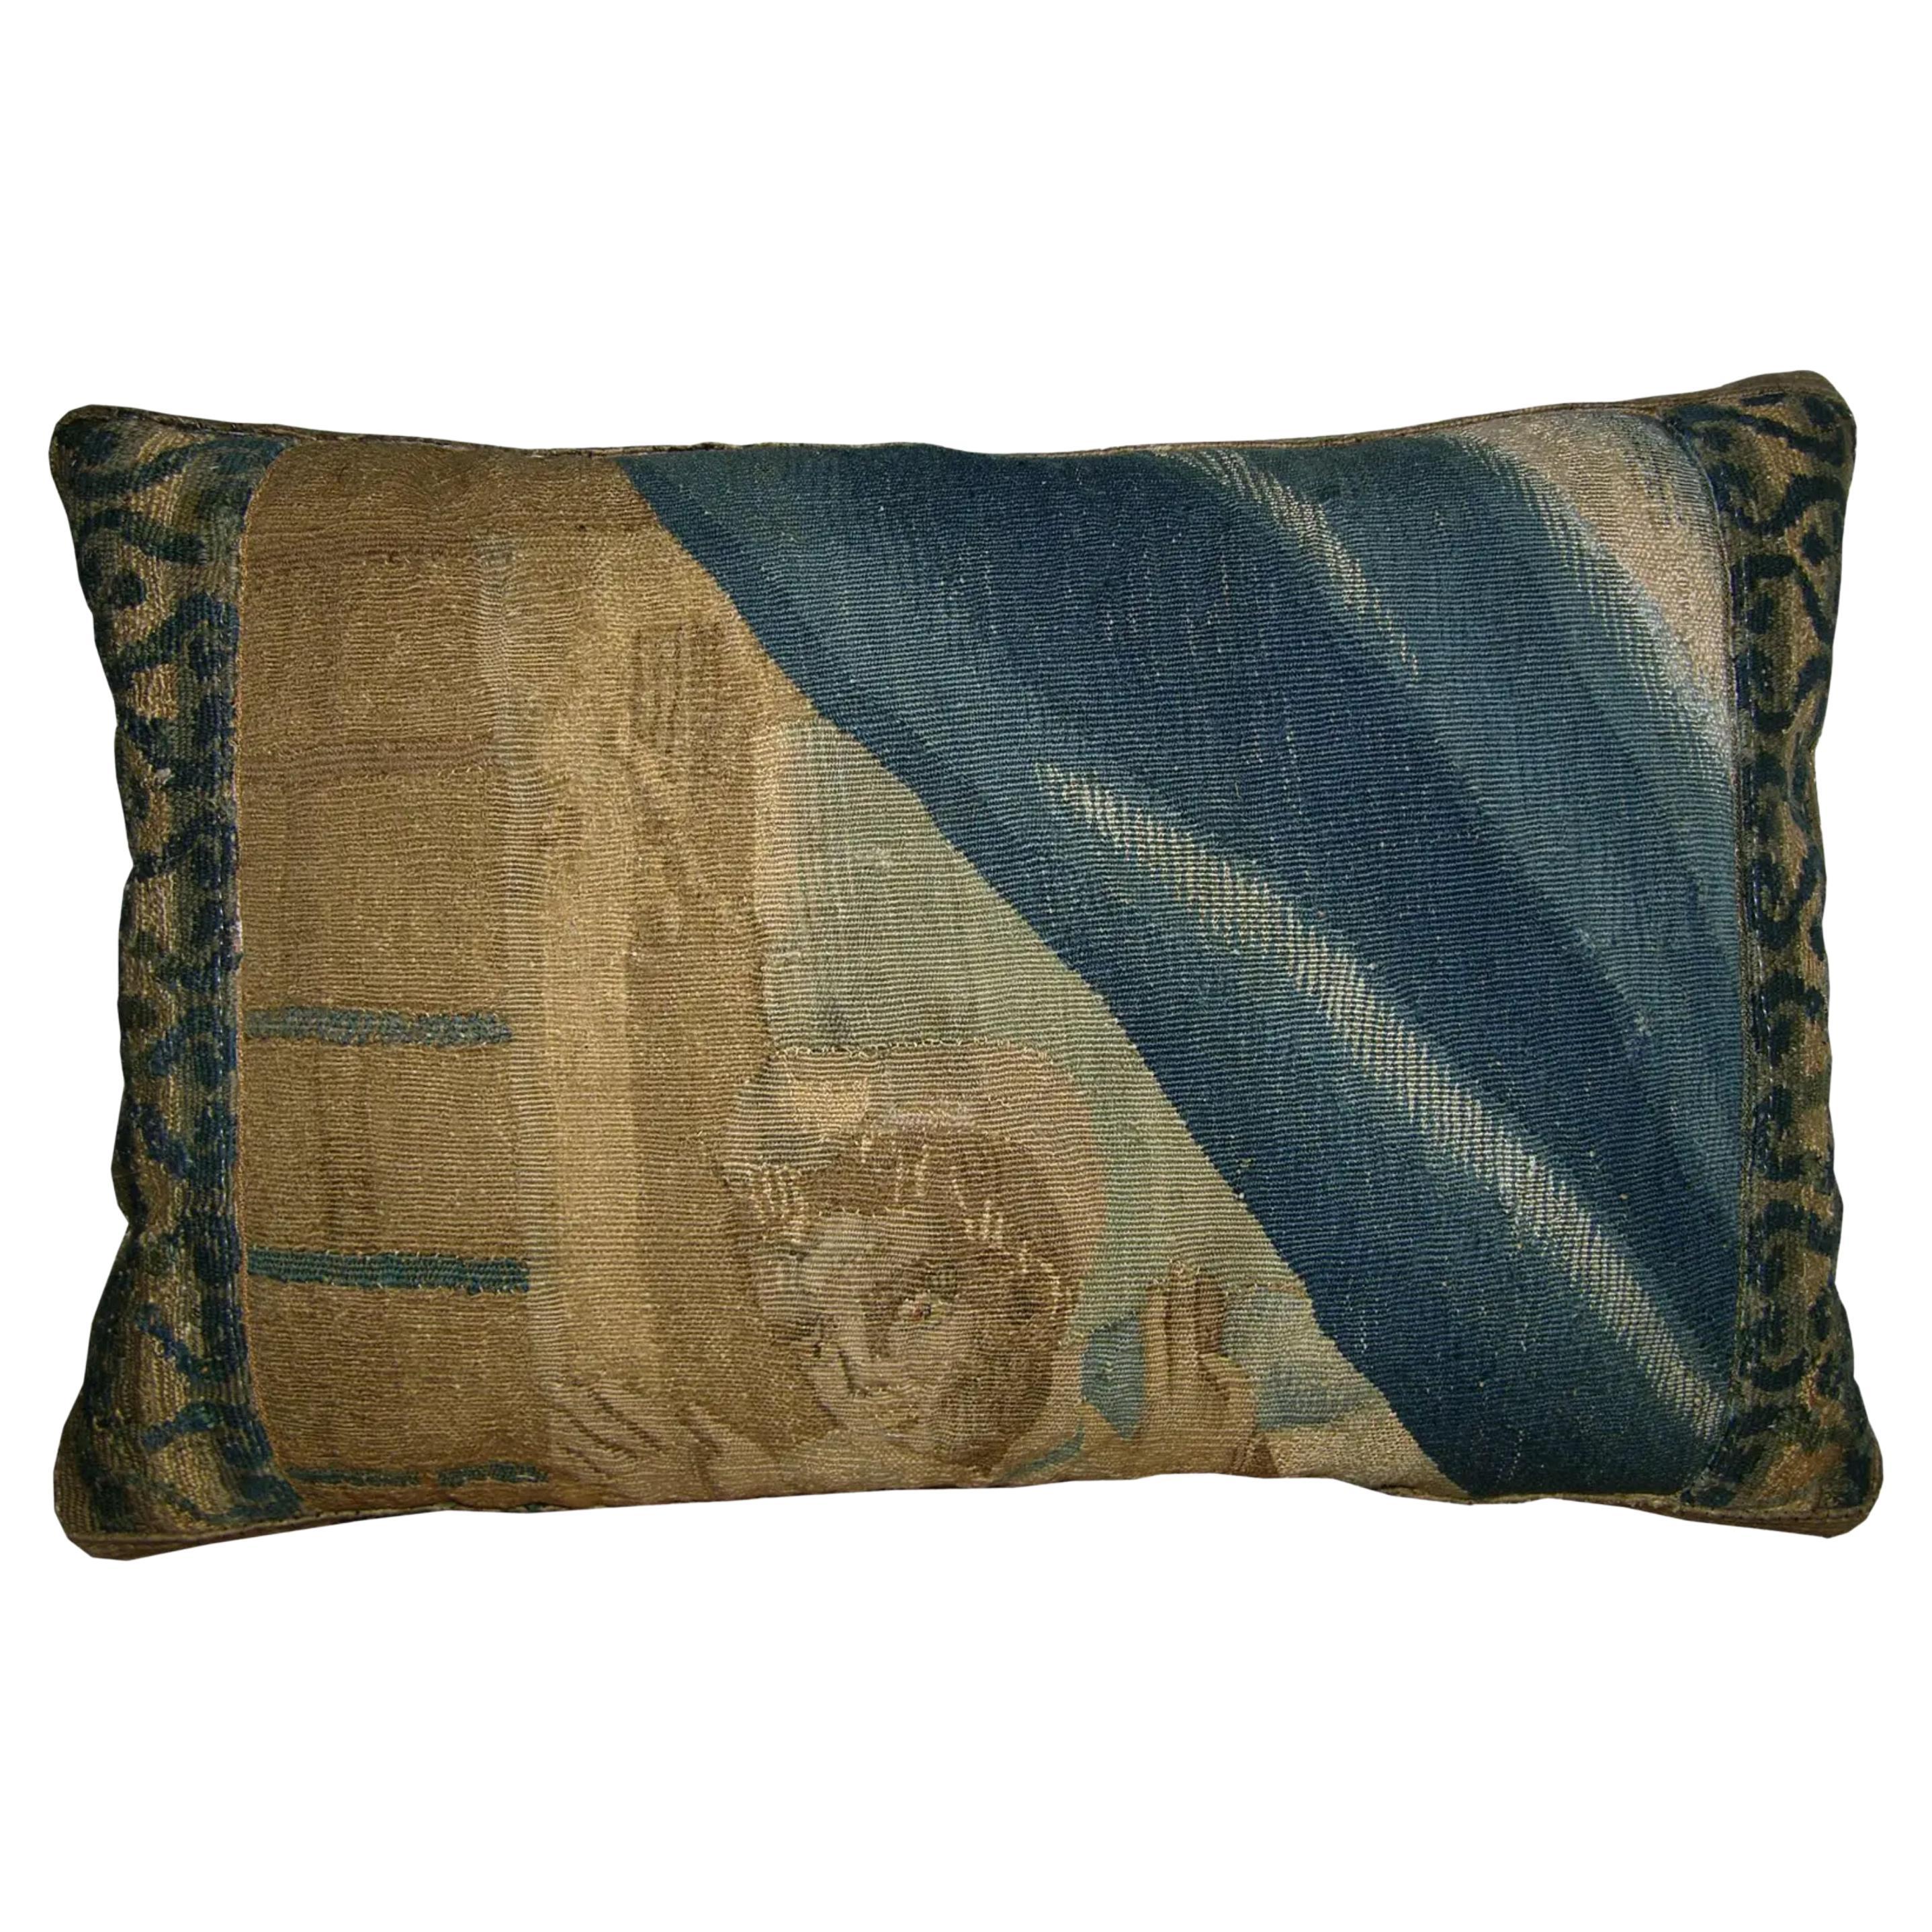 17th Century Antique Brussels Tapestry Pillow - 18 X 12